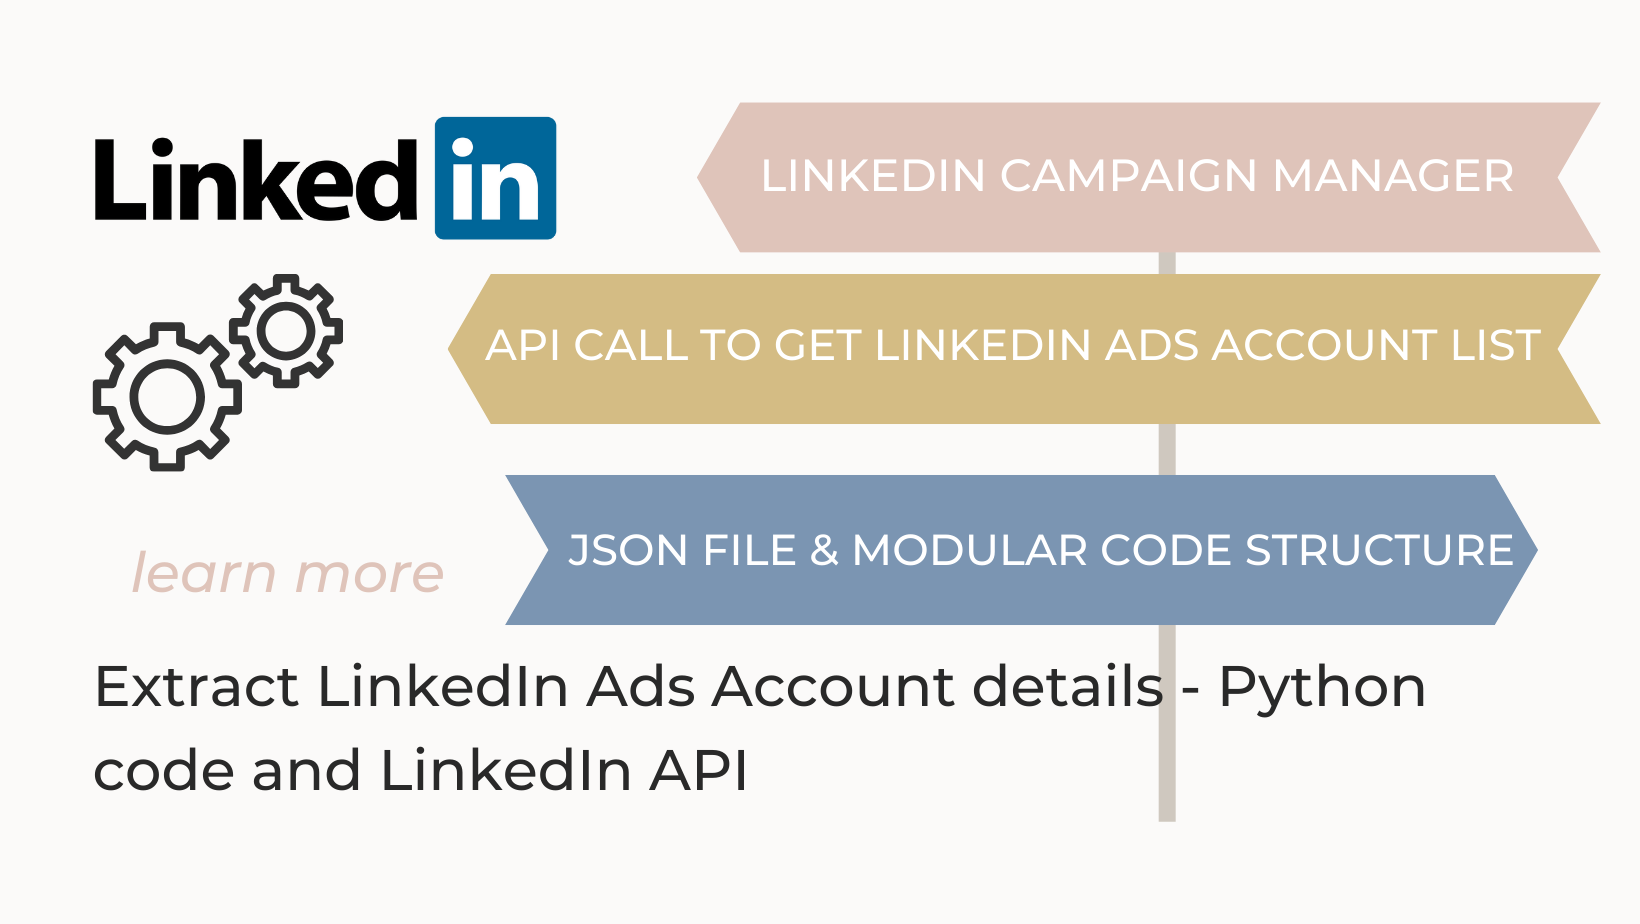 What is the LinkedIn API? The LinkedIn Marketing API is used to programmatically query data, create and manage ads, create and manage campaigns, get account-related data, and perform a wide variety of other tasks. This guide helps you complete all the steps needed to use LinkedIn Marketing API successfully. The LinkedIn API is the REST API and is the heart of all programmatic interactions with LinkedIn. LinkedIn API enables you to bring the power of the world’s largest professional network to your apps. By using the LinkedIn API (also known as LinkedIn Marketing API) you can use several LinkedIn services. Most importantly you can extract your campaign performance data using this API.